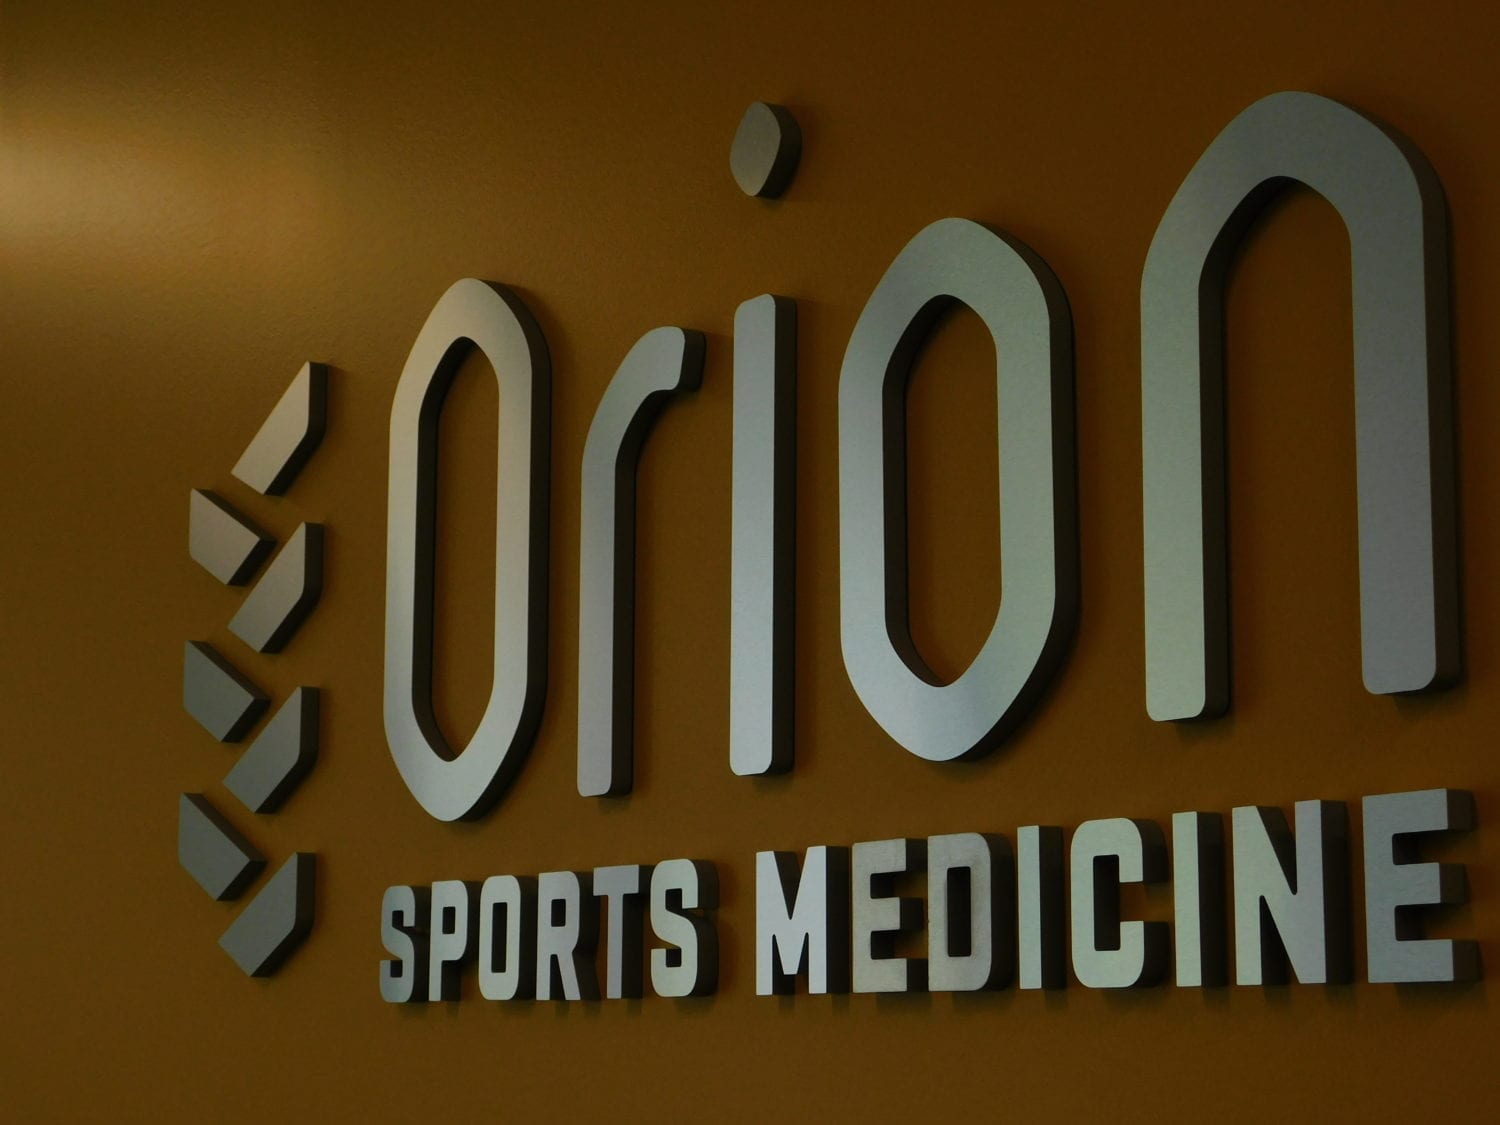 Orion Sports Medicine Wall